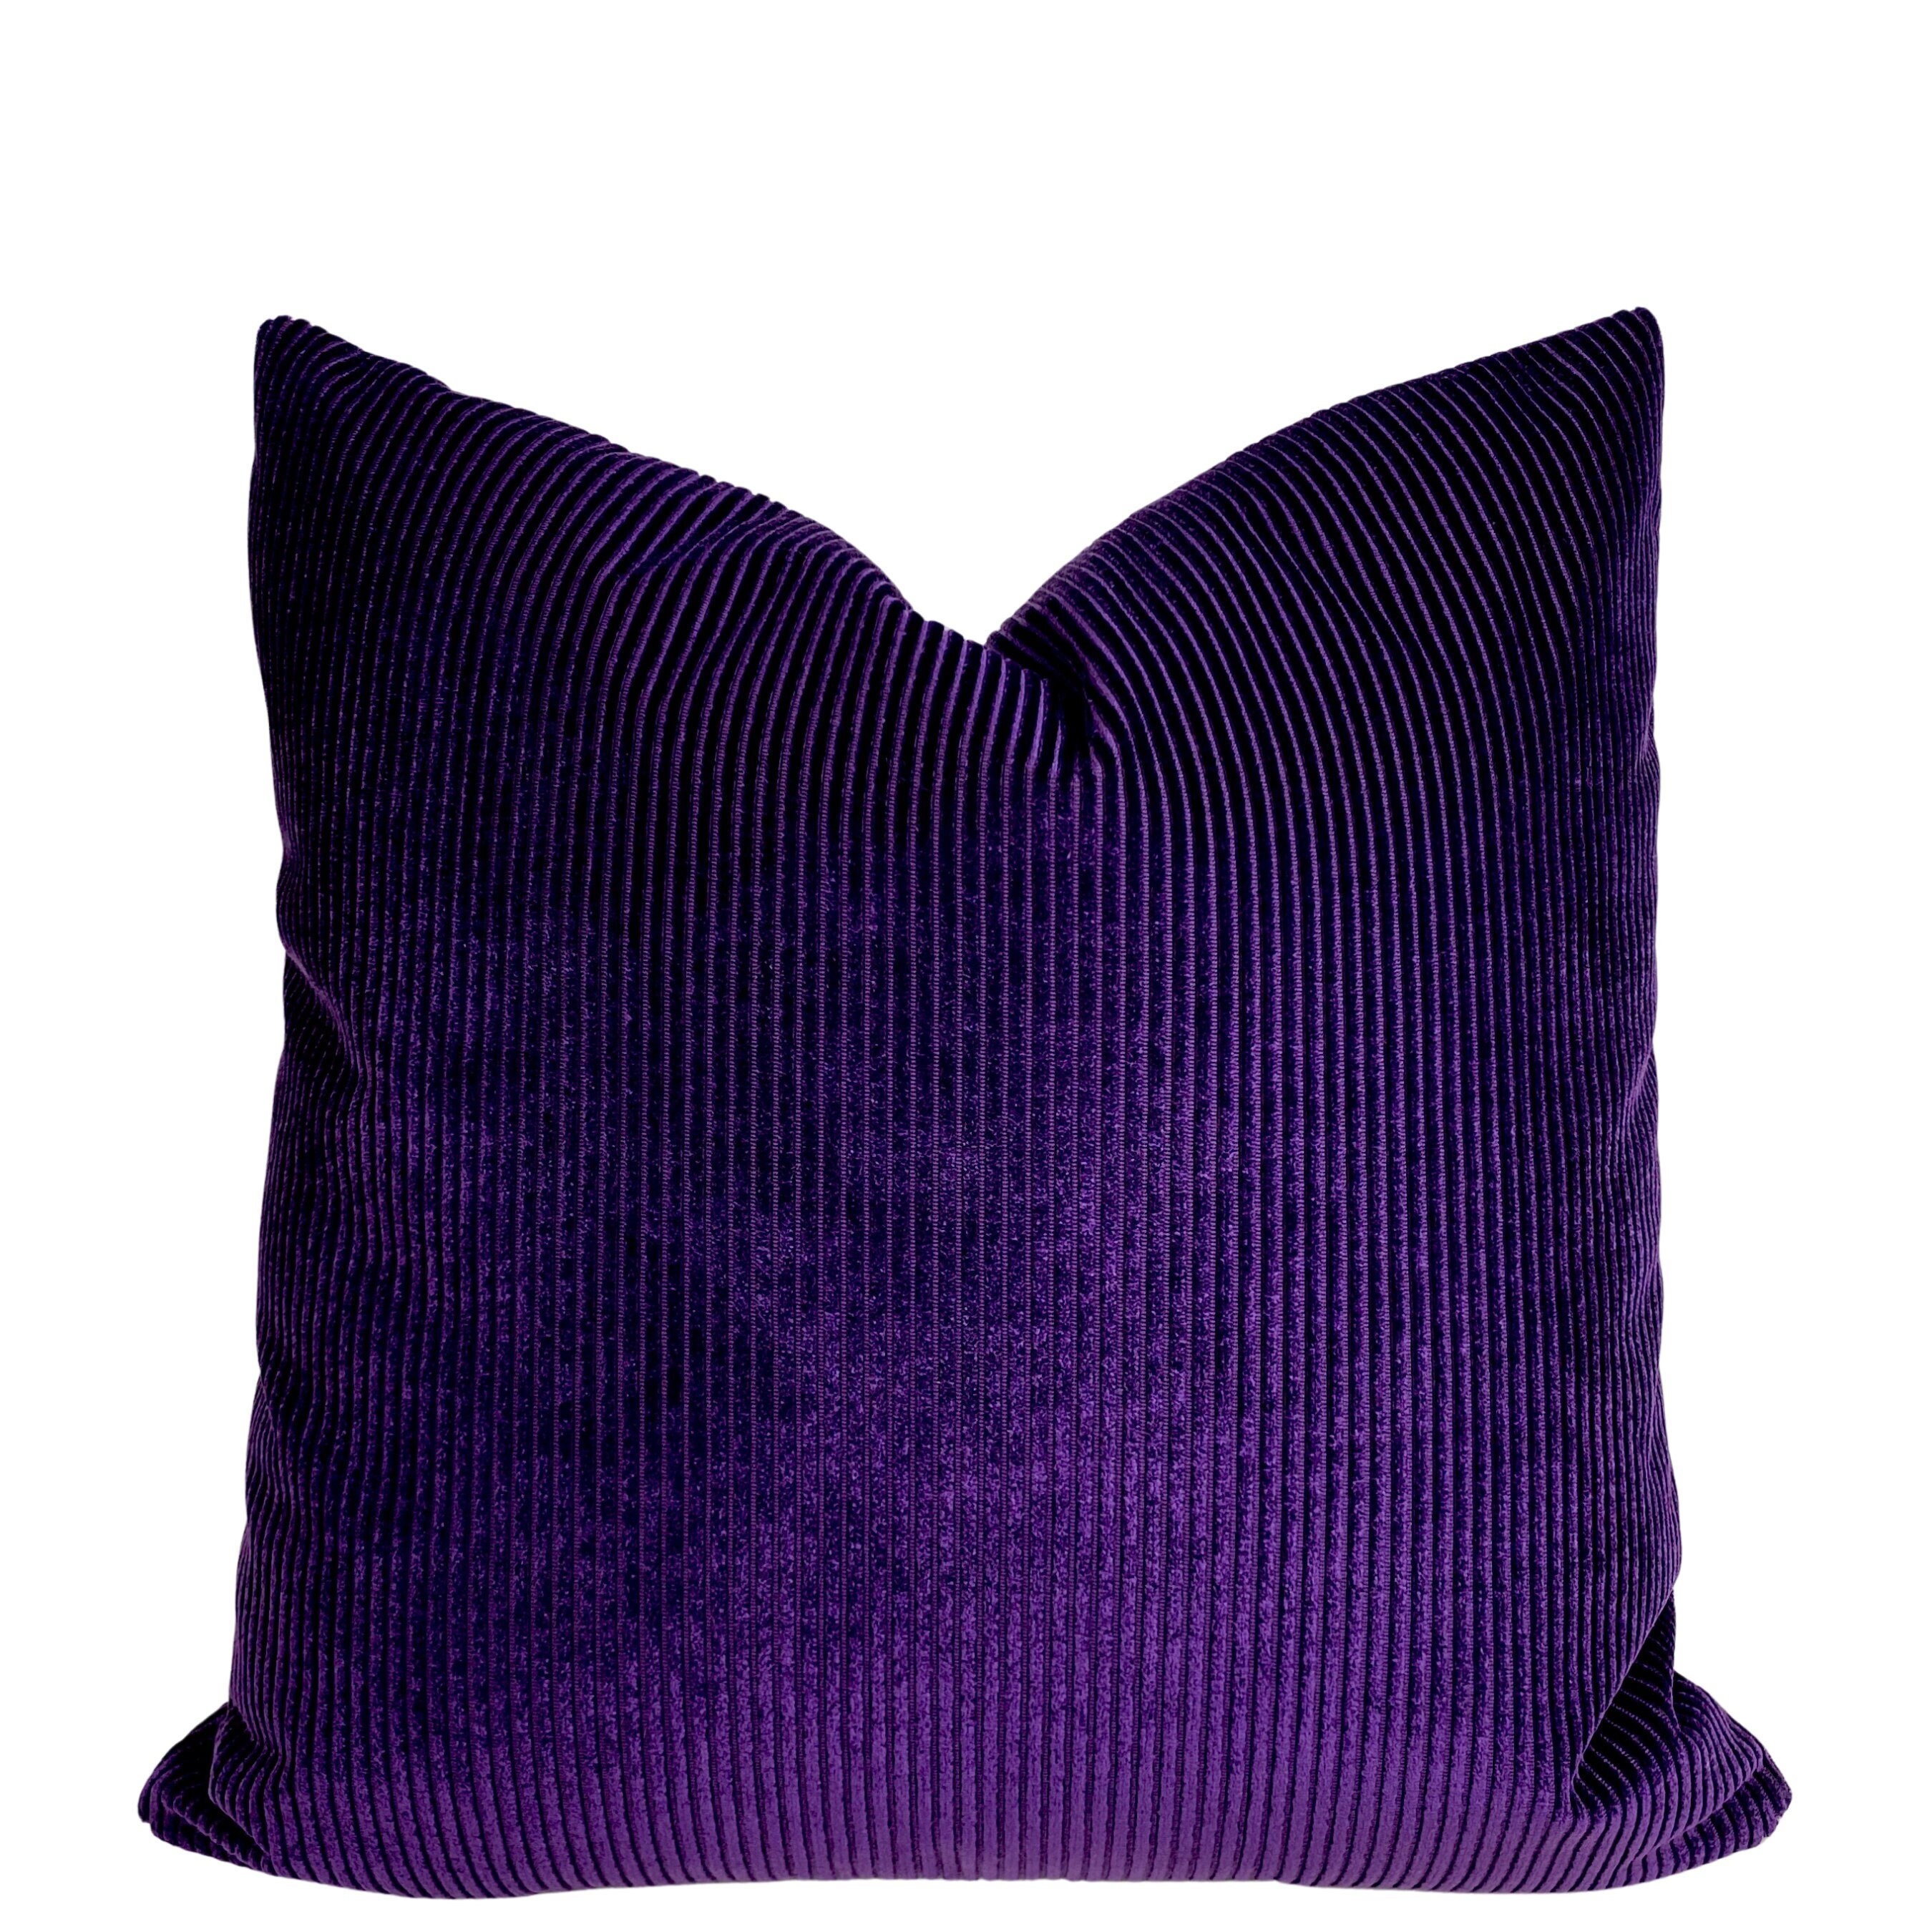 Soft Corduroy Striped Velvet Rectangle Decorative Throw Pillow Cusion For  Couch, 12 x 20, Violet Purple, 2 Pack